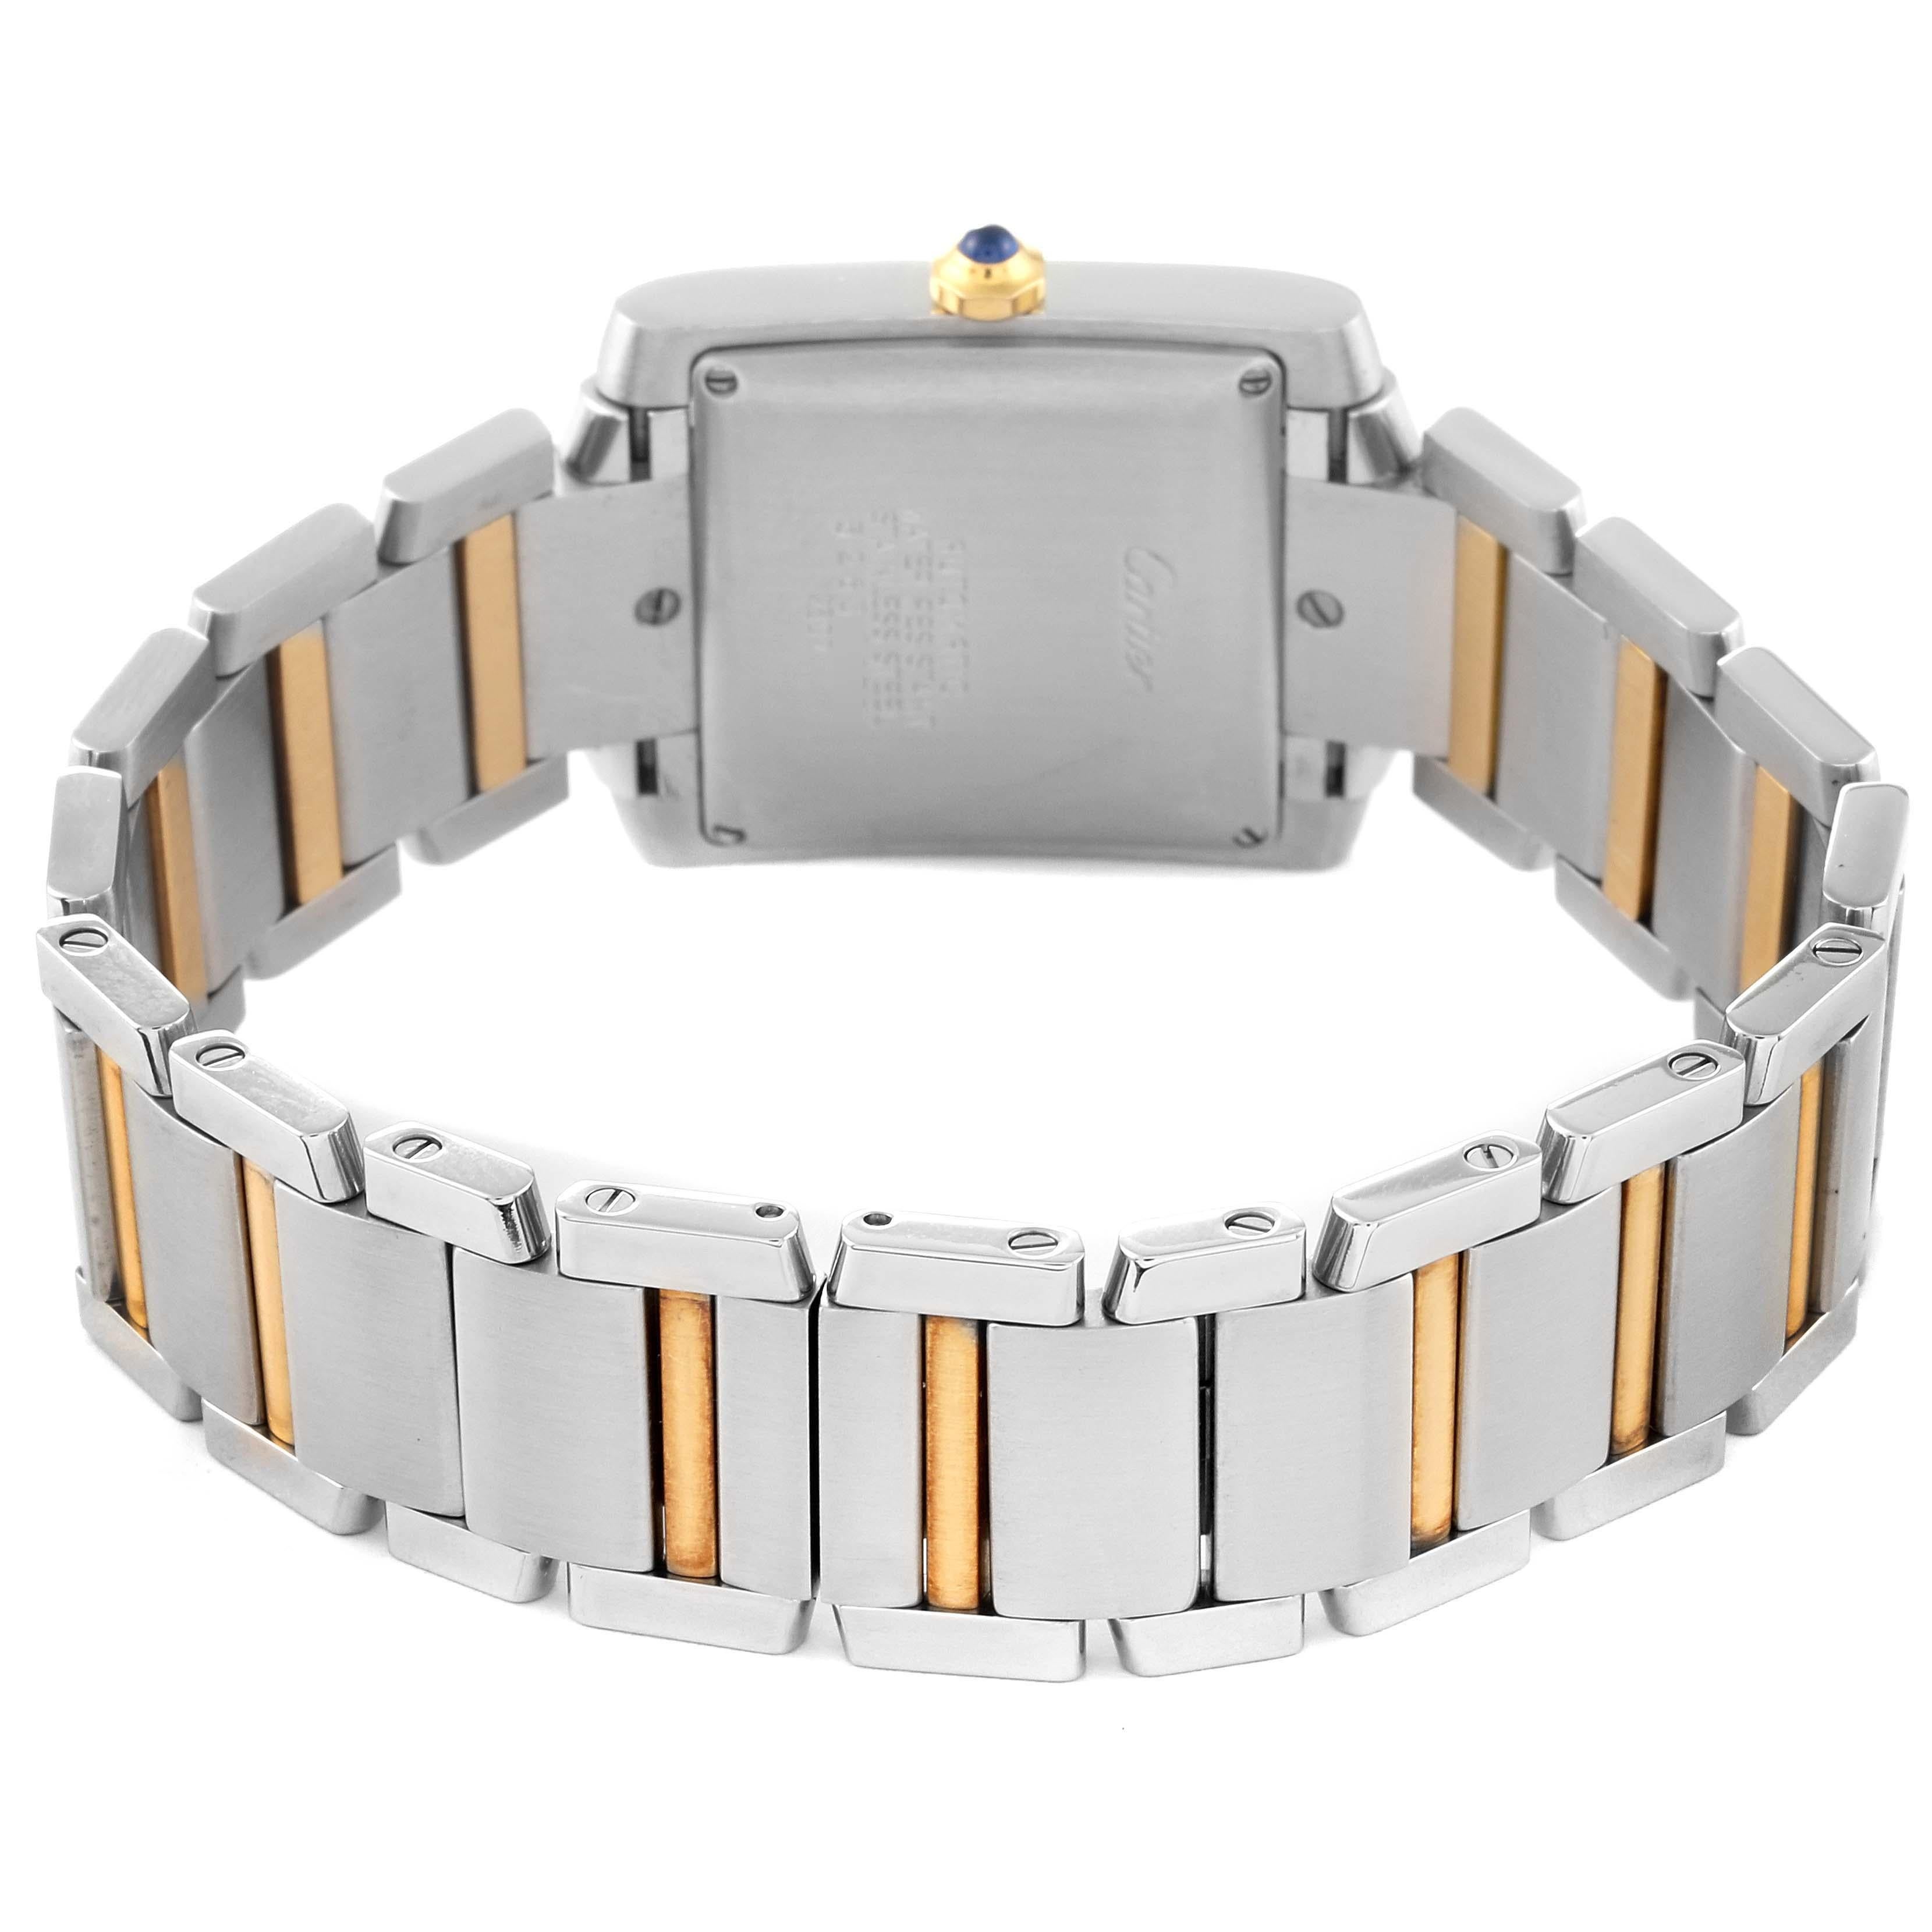 Cartier Tank Francaise Steel Yellow Gold Silver Dial Mens Watch W51005Q4 2